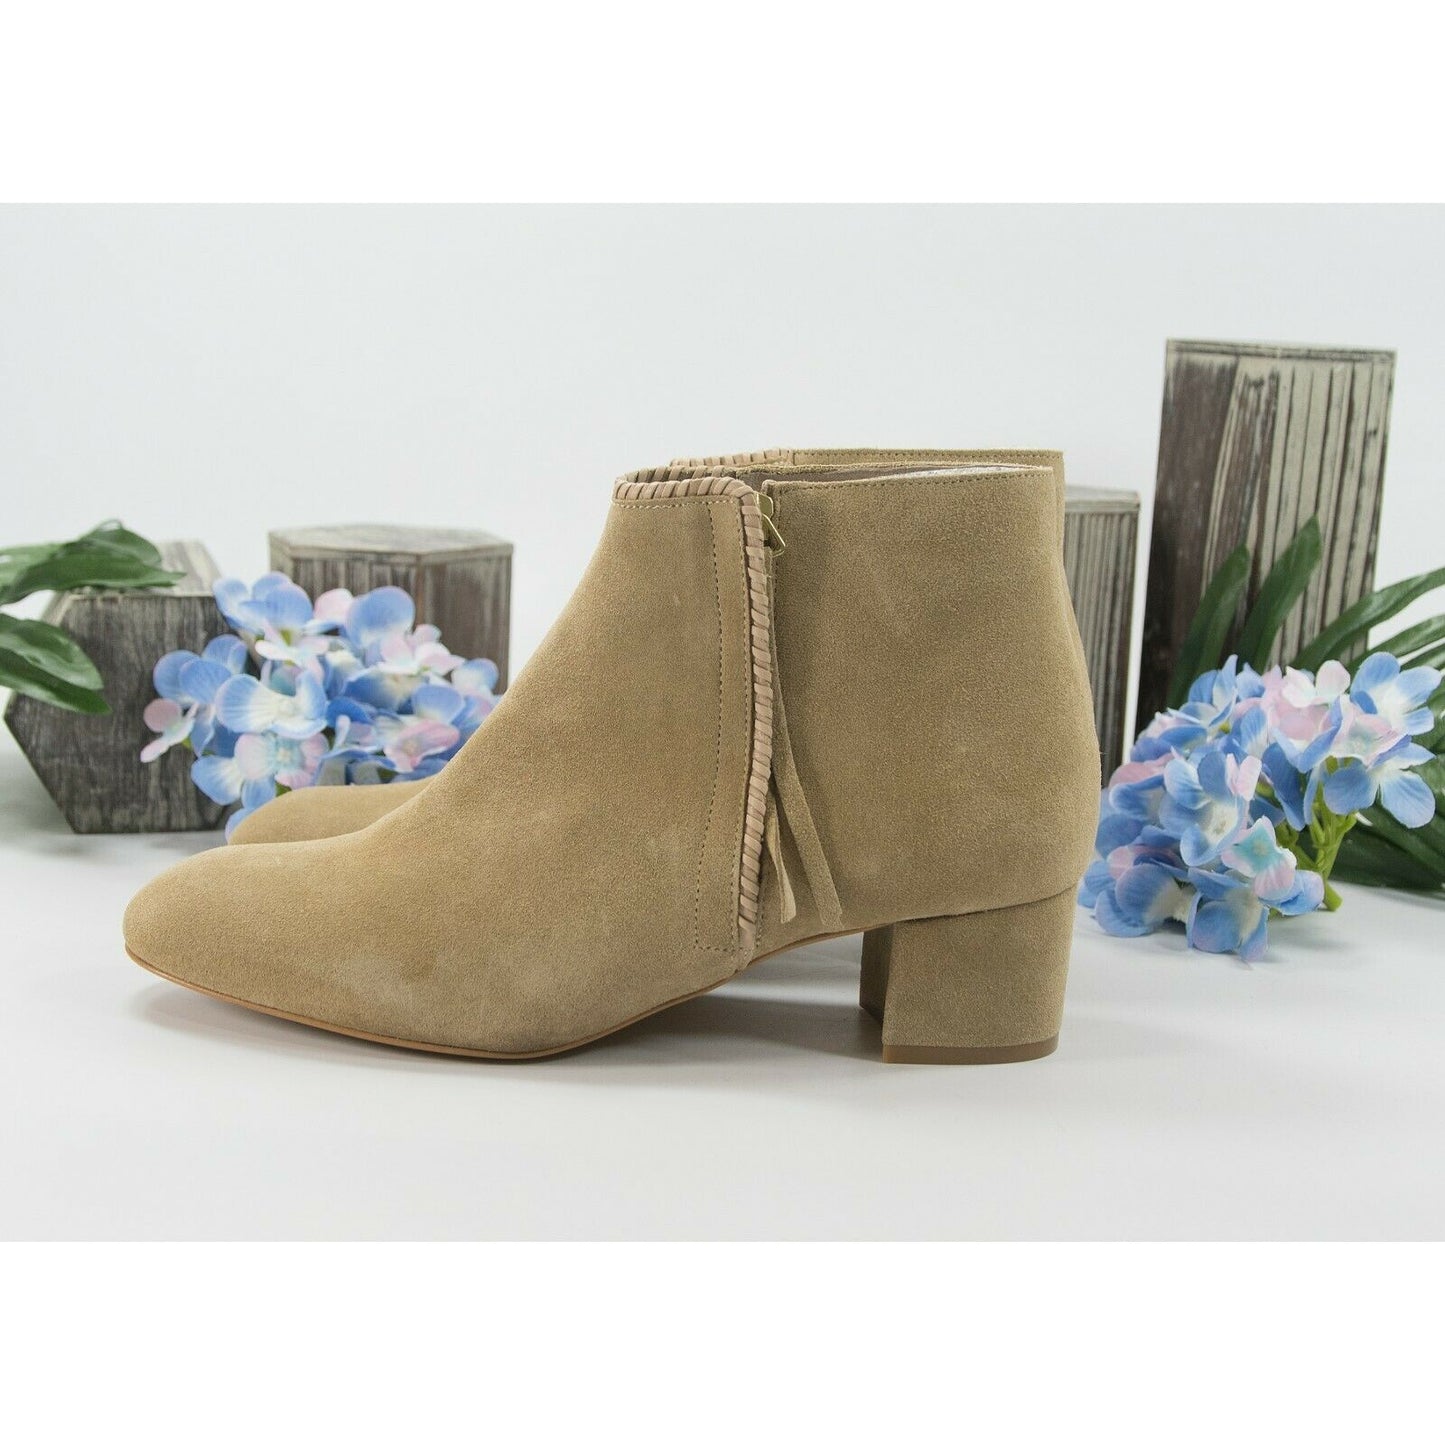 Maje Camel Suede Felicia Bootie Ankle Boot Shoes Sz 36 6